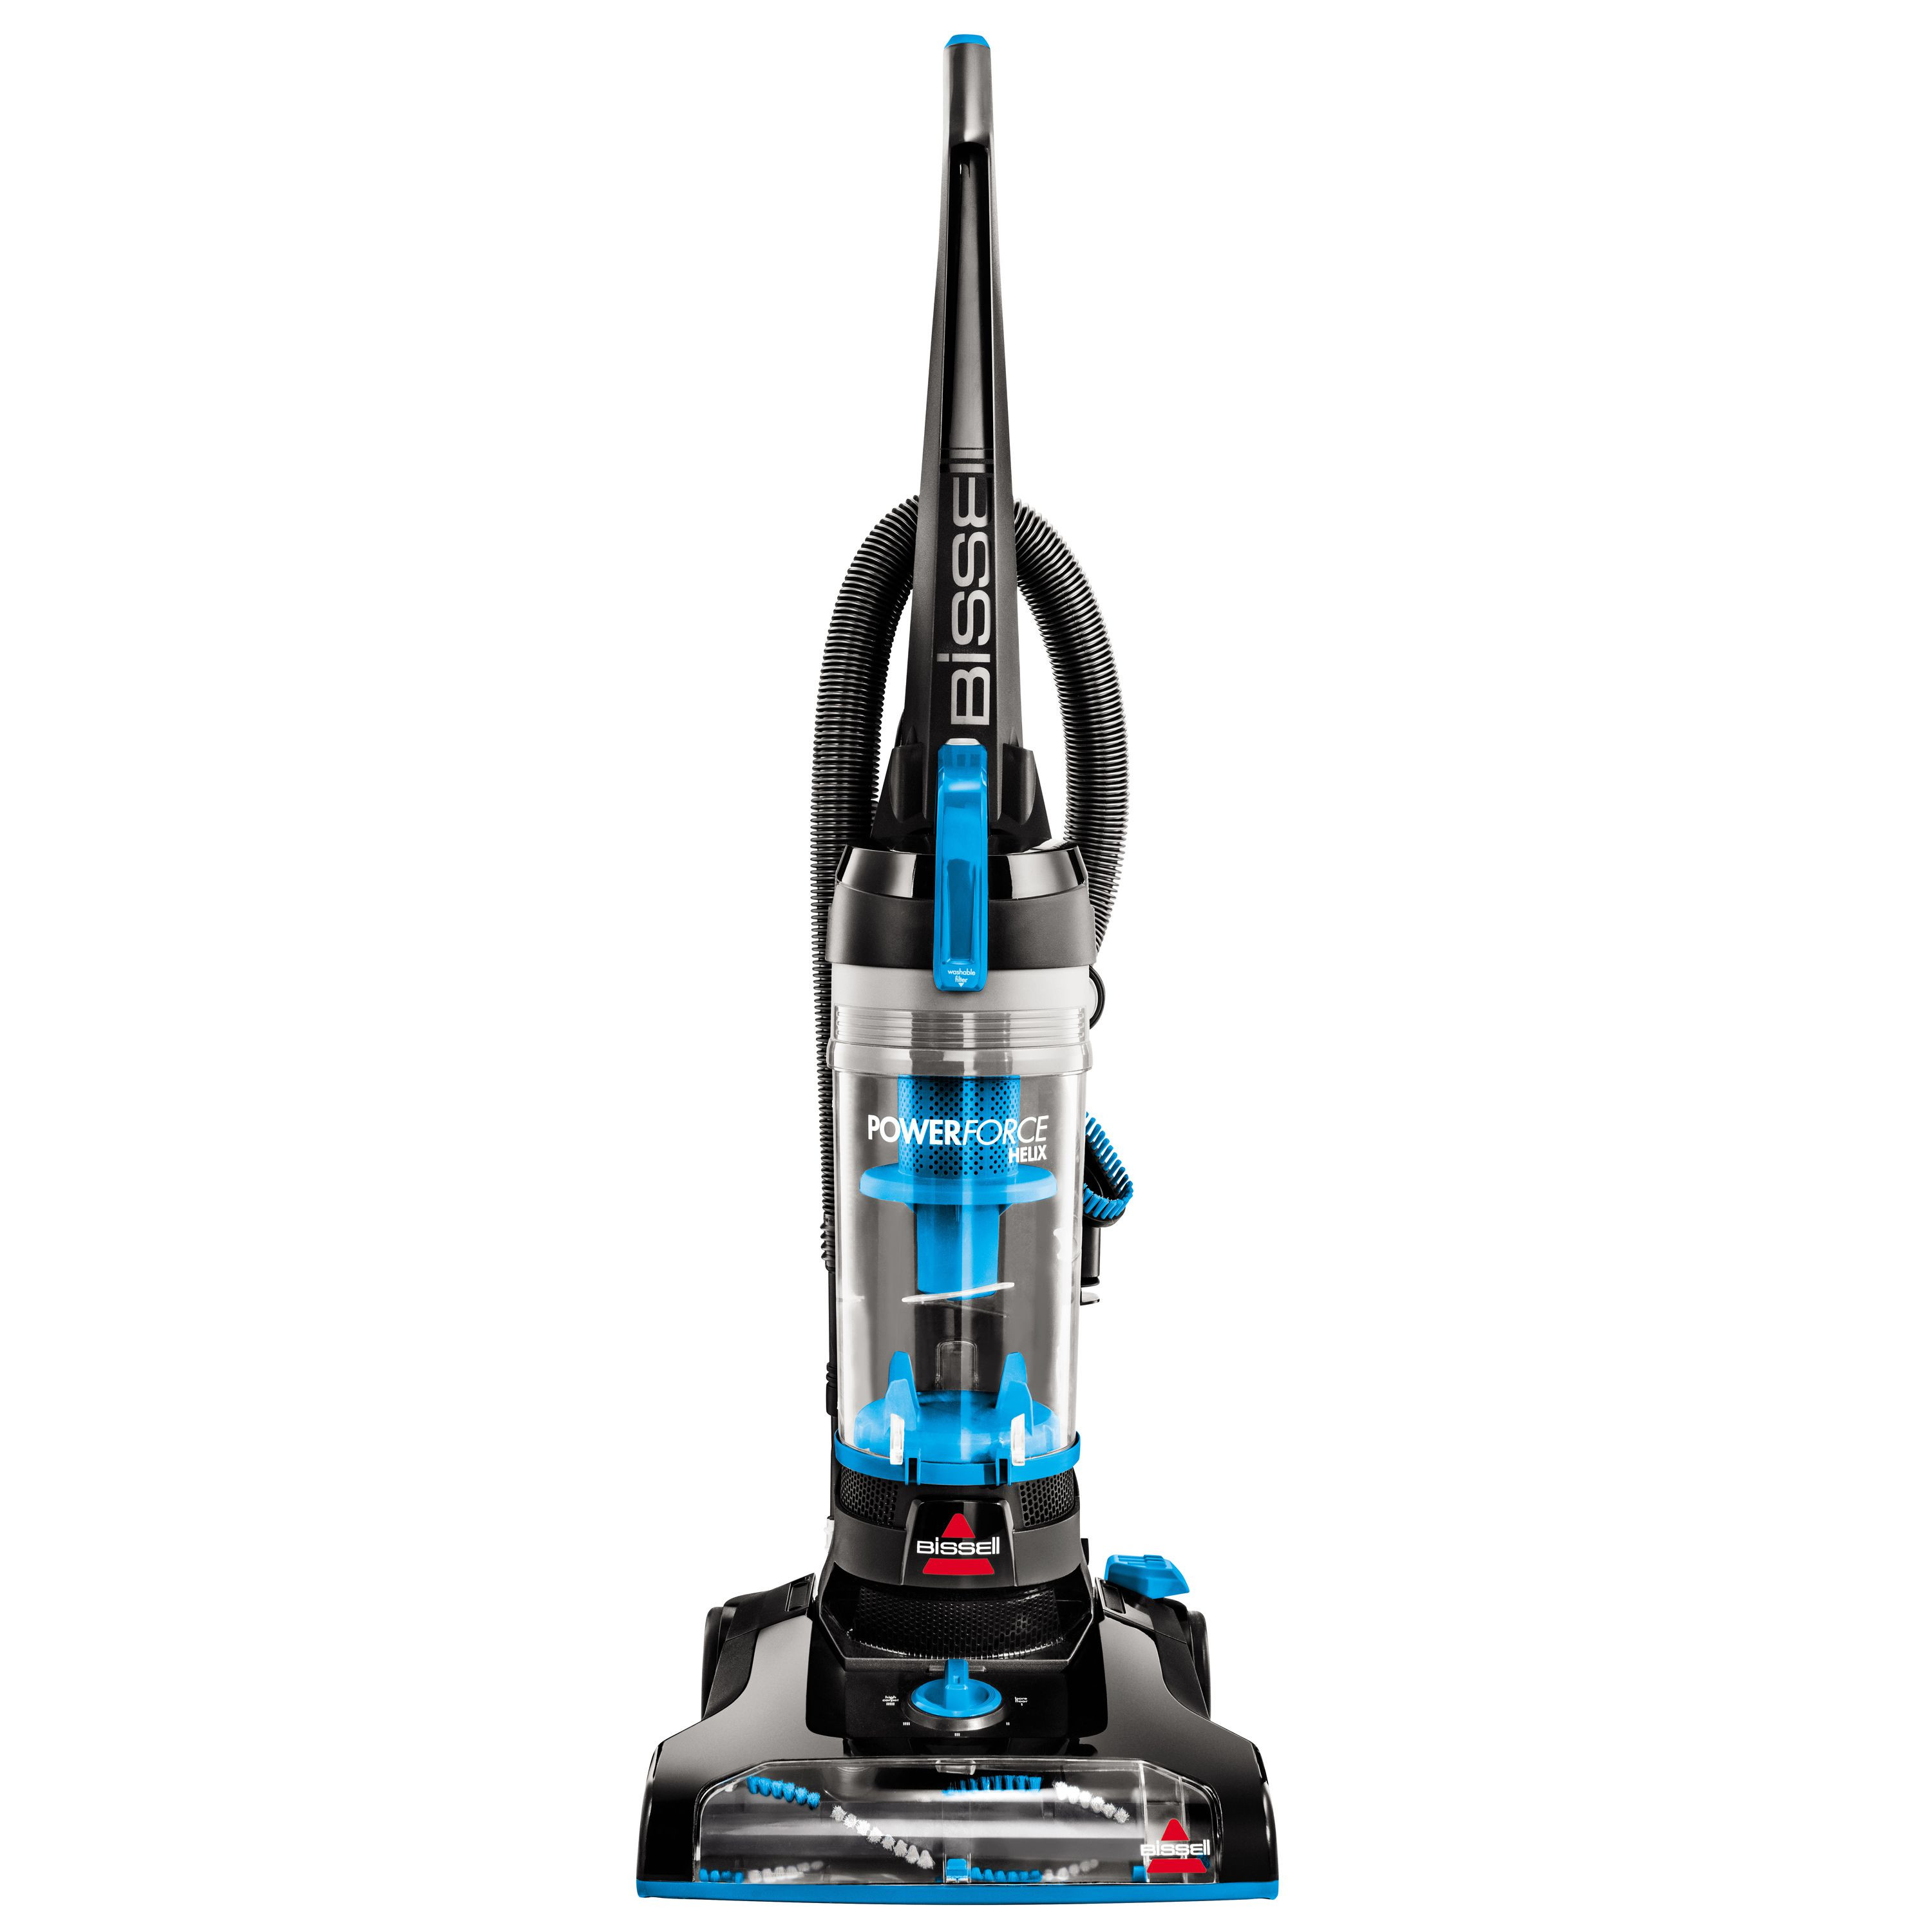 16 Recommended Best Vacuums for Hardwood Floors 2016 2024 free download best vacuums for hardwood floors 2016 of the 10 best vacuum cleaners to buy in 2018 inside e4b12fd4 906f 4bf0 a270 afe8dc531860 1 c698176588ad49a4cf1bde639e9a838a 5bace08ac9e77c00257d9454